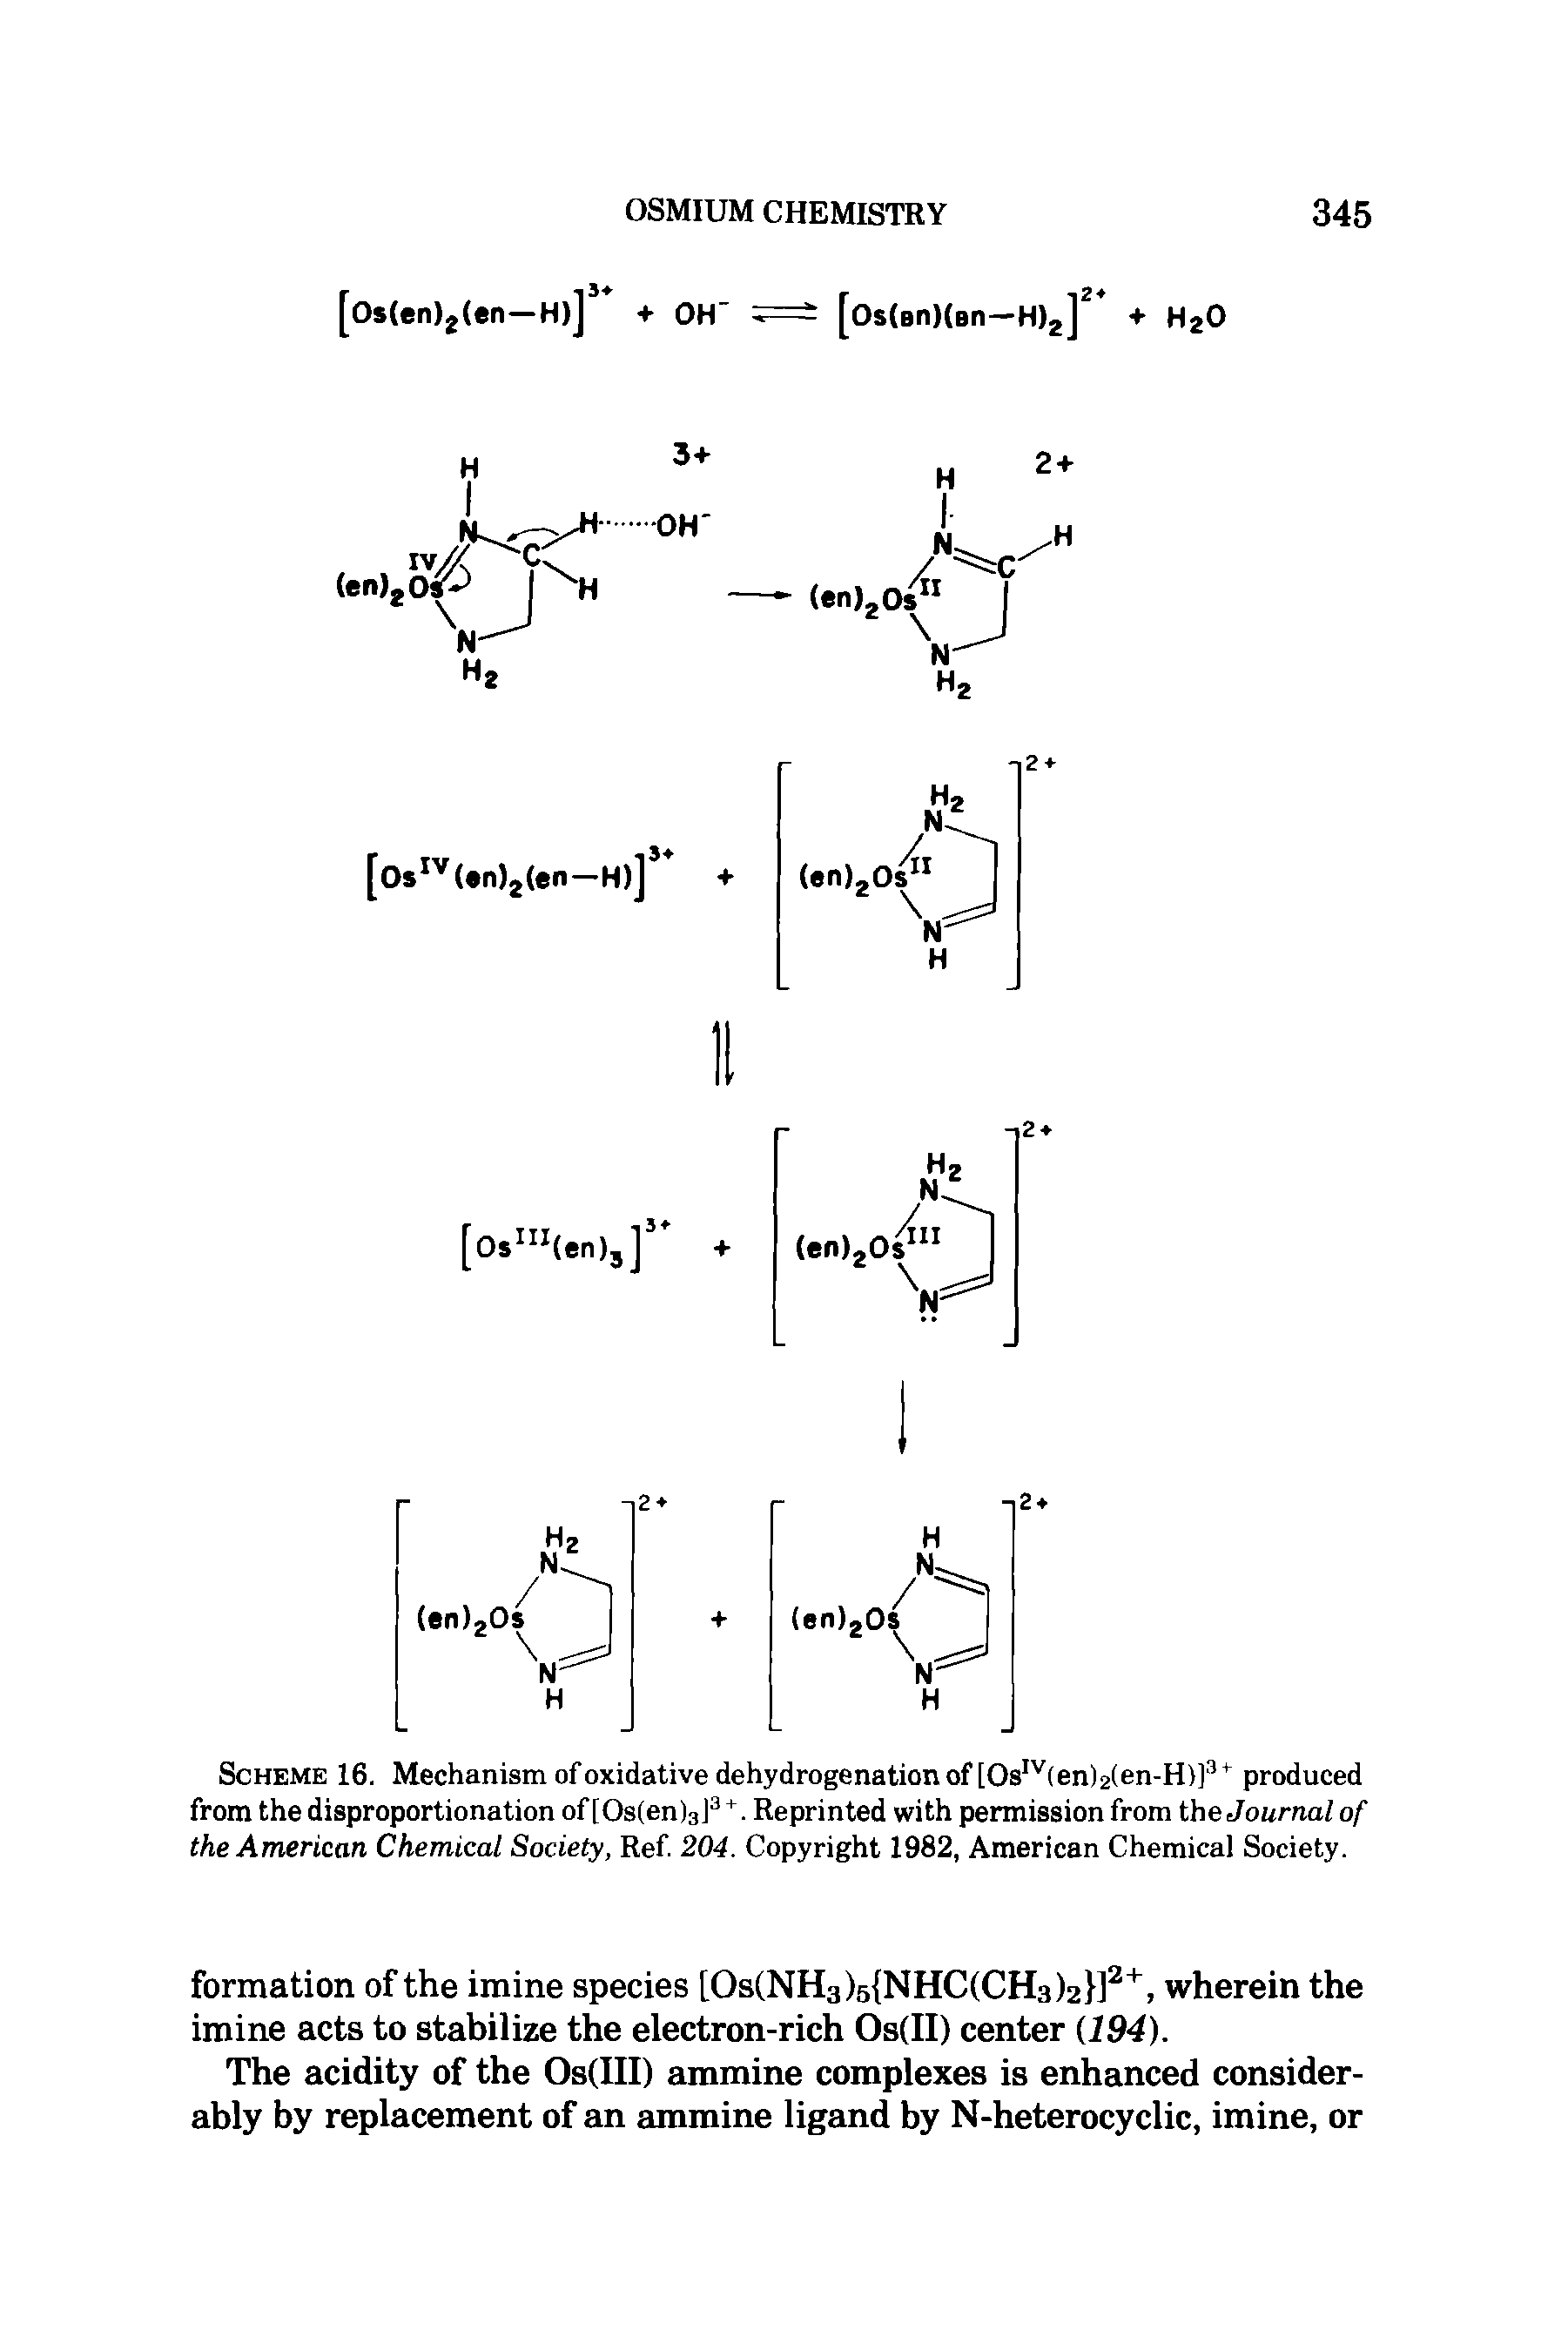 Scheme 16. Mechanism of oxidative dehydrogenation of [OsIV(en)2(en-H)]3+ produced from the disproportionation of[Os(en)3J3+. Reprinted with permission from the Journal of the American Chemical Society, Ref. 204. Copyright 1982, American Chemical Society.